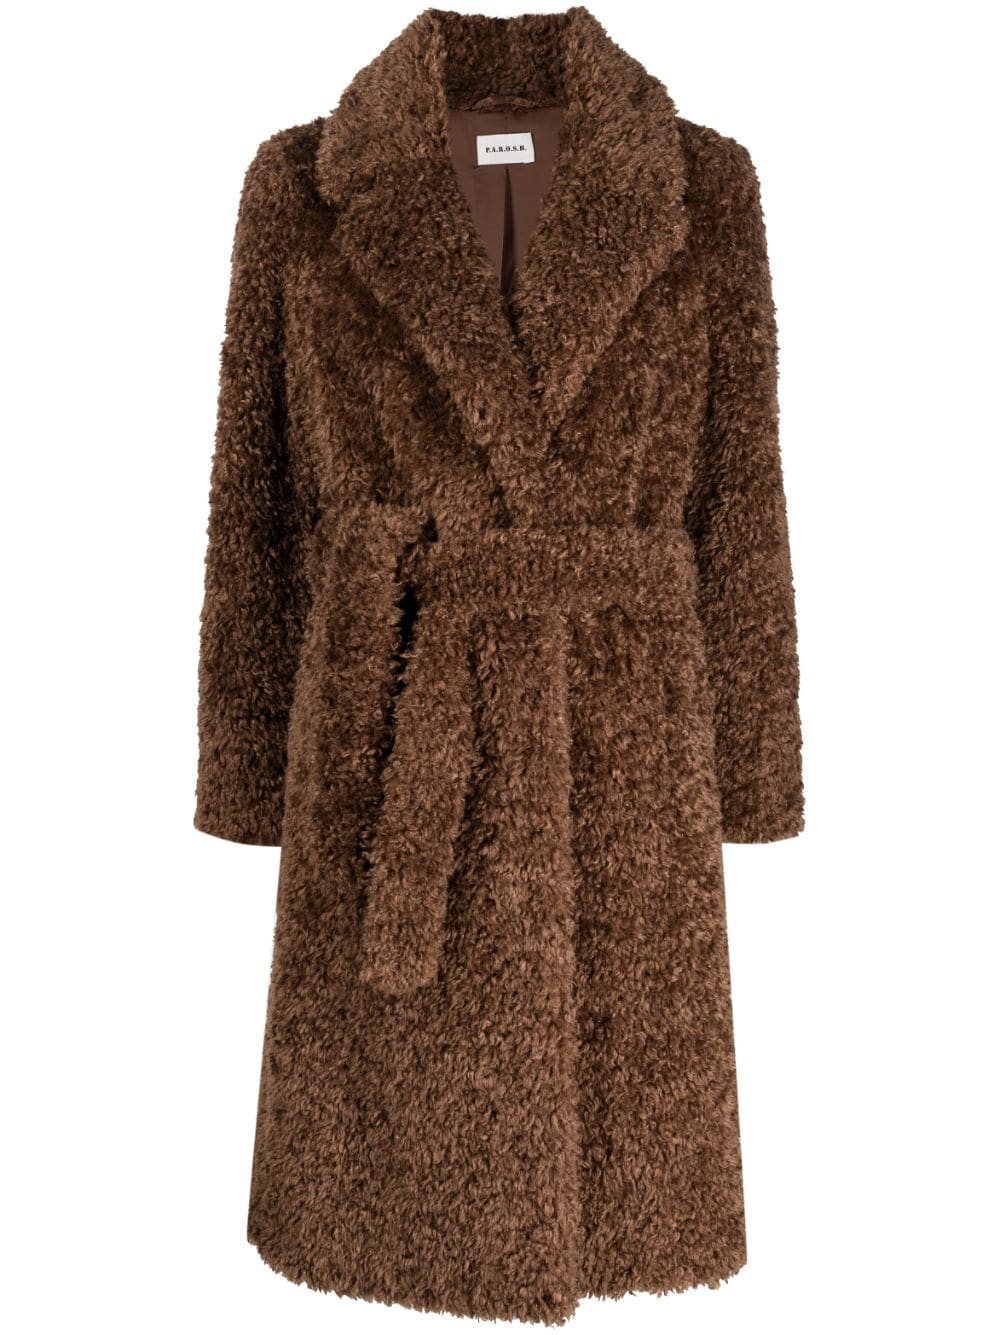 P.A.R.O.S.H. Belted faux-shearling Coat - Farfetch